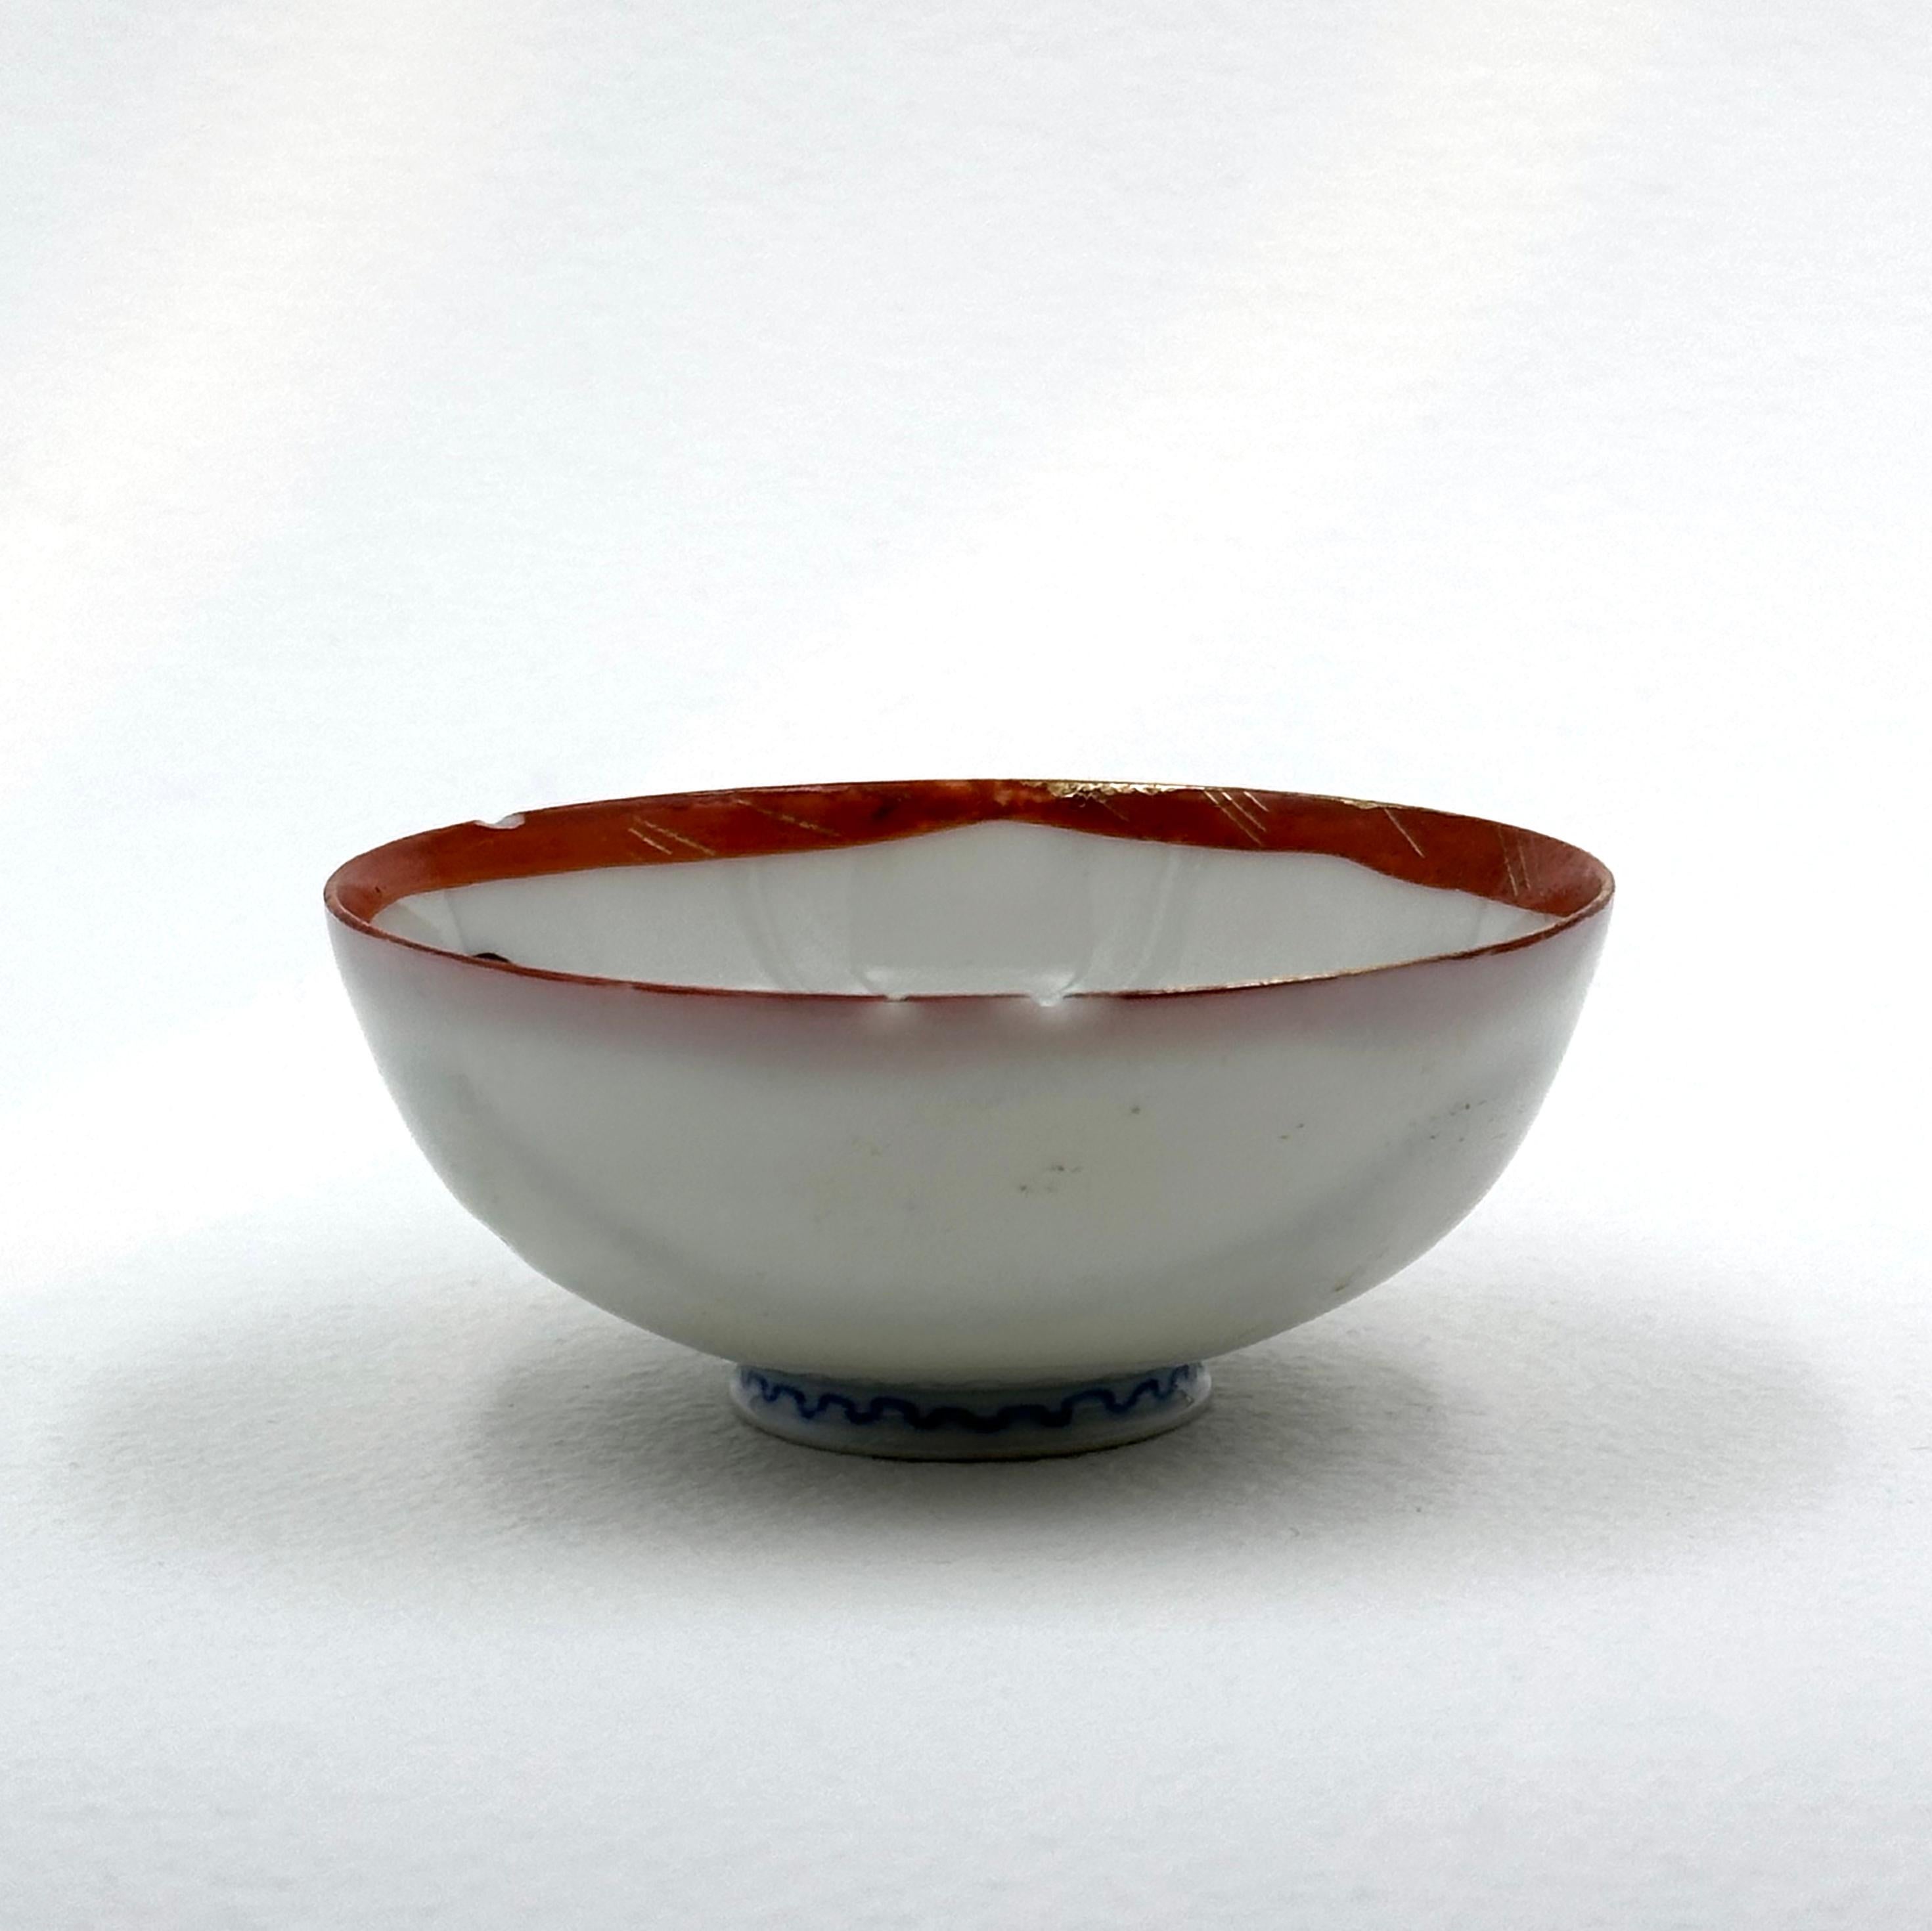 Hand-painted Japanese Sake Bowl

1890-1918
Fine porcelain, gold luster
1.25 x 2.75 x 2.75 inches

Condition note: 2mm rim chip